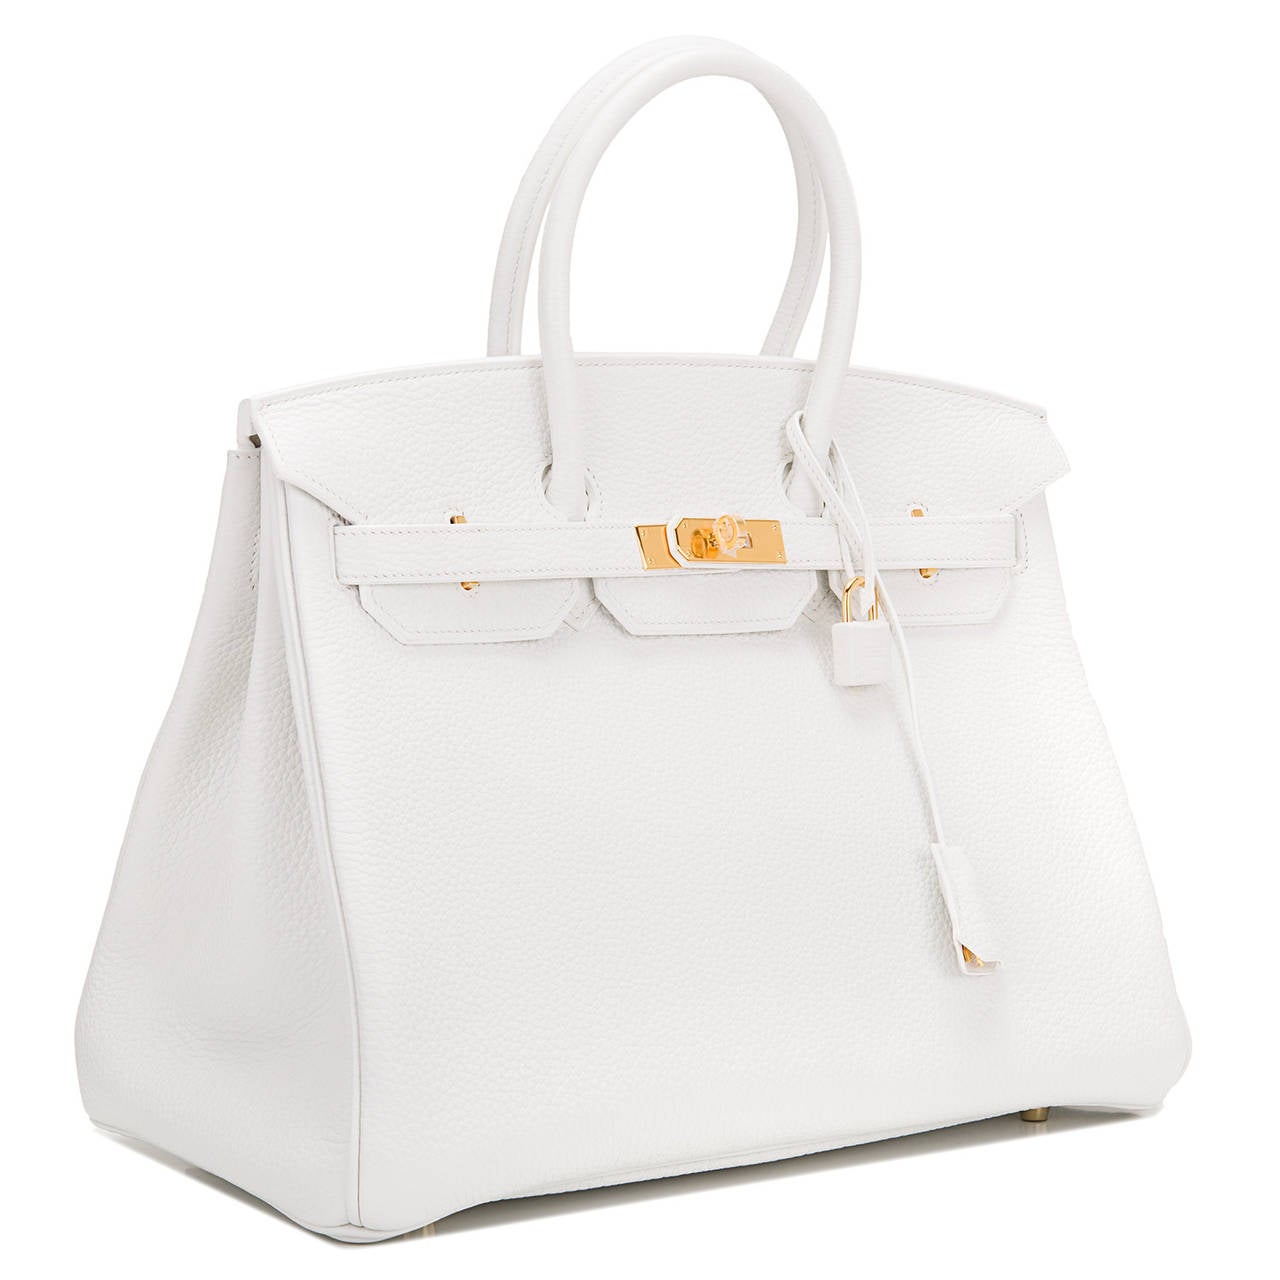 Hermes white Birkin 35cm in taurillon clemence leather with gold hardware.

This white Birkin features tonal stitching, front toggle closure, clochette with lock and two keys, and double rolled handles. The interior is lined in white chevre with